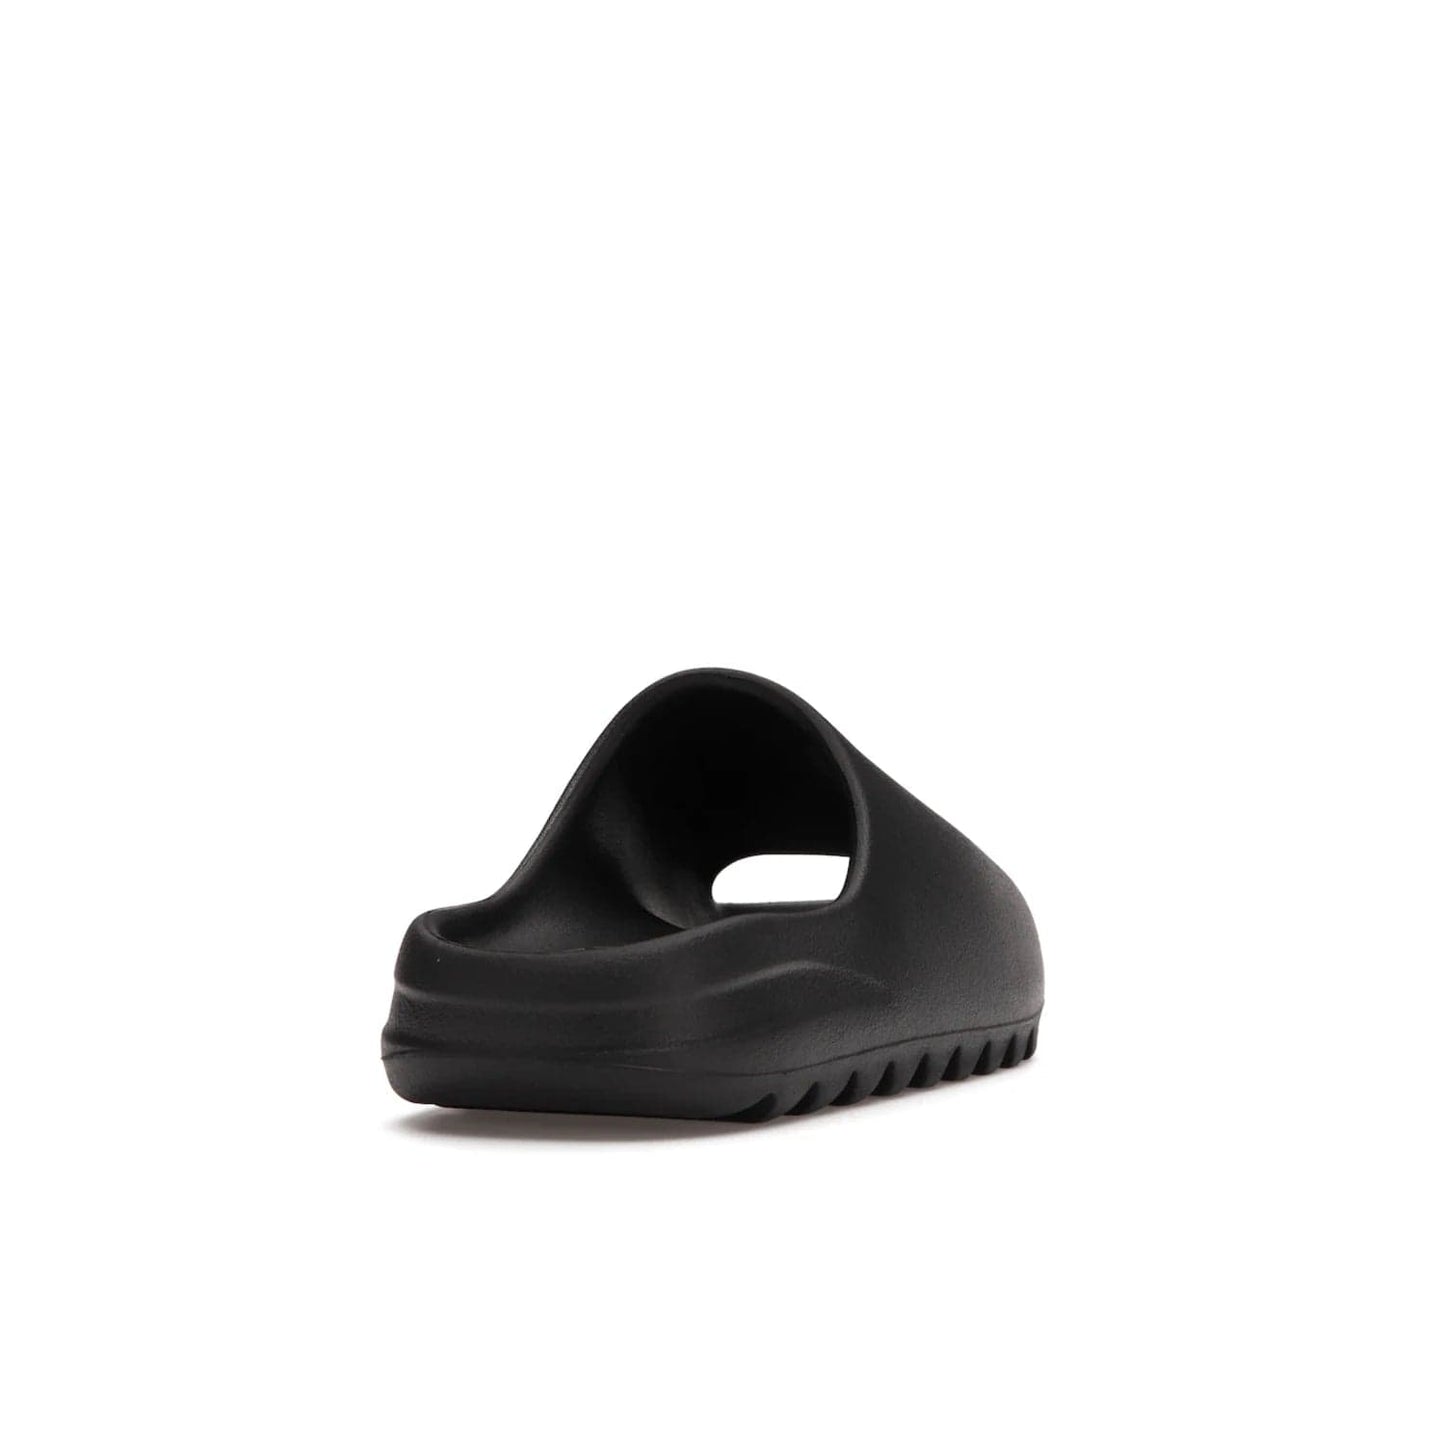 adidas Yeezy Slide Onyx - Image 30 - Only at www.BallersClubKickz.com - Step into comfort and style with the adidas Yeezy Slide Onyx. Featuring foam construction, an all-black colorway and a grooved outsole for stability and responsiveness, this versatile slide is a must-have for your collection.